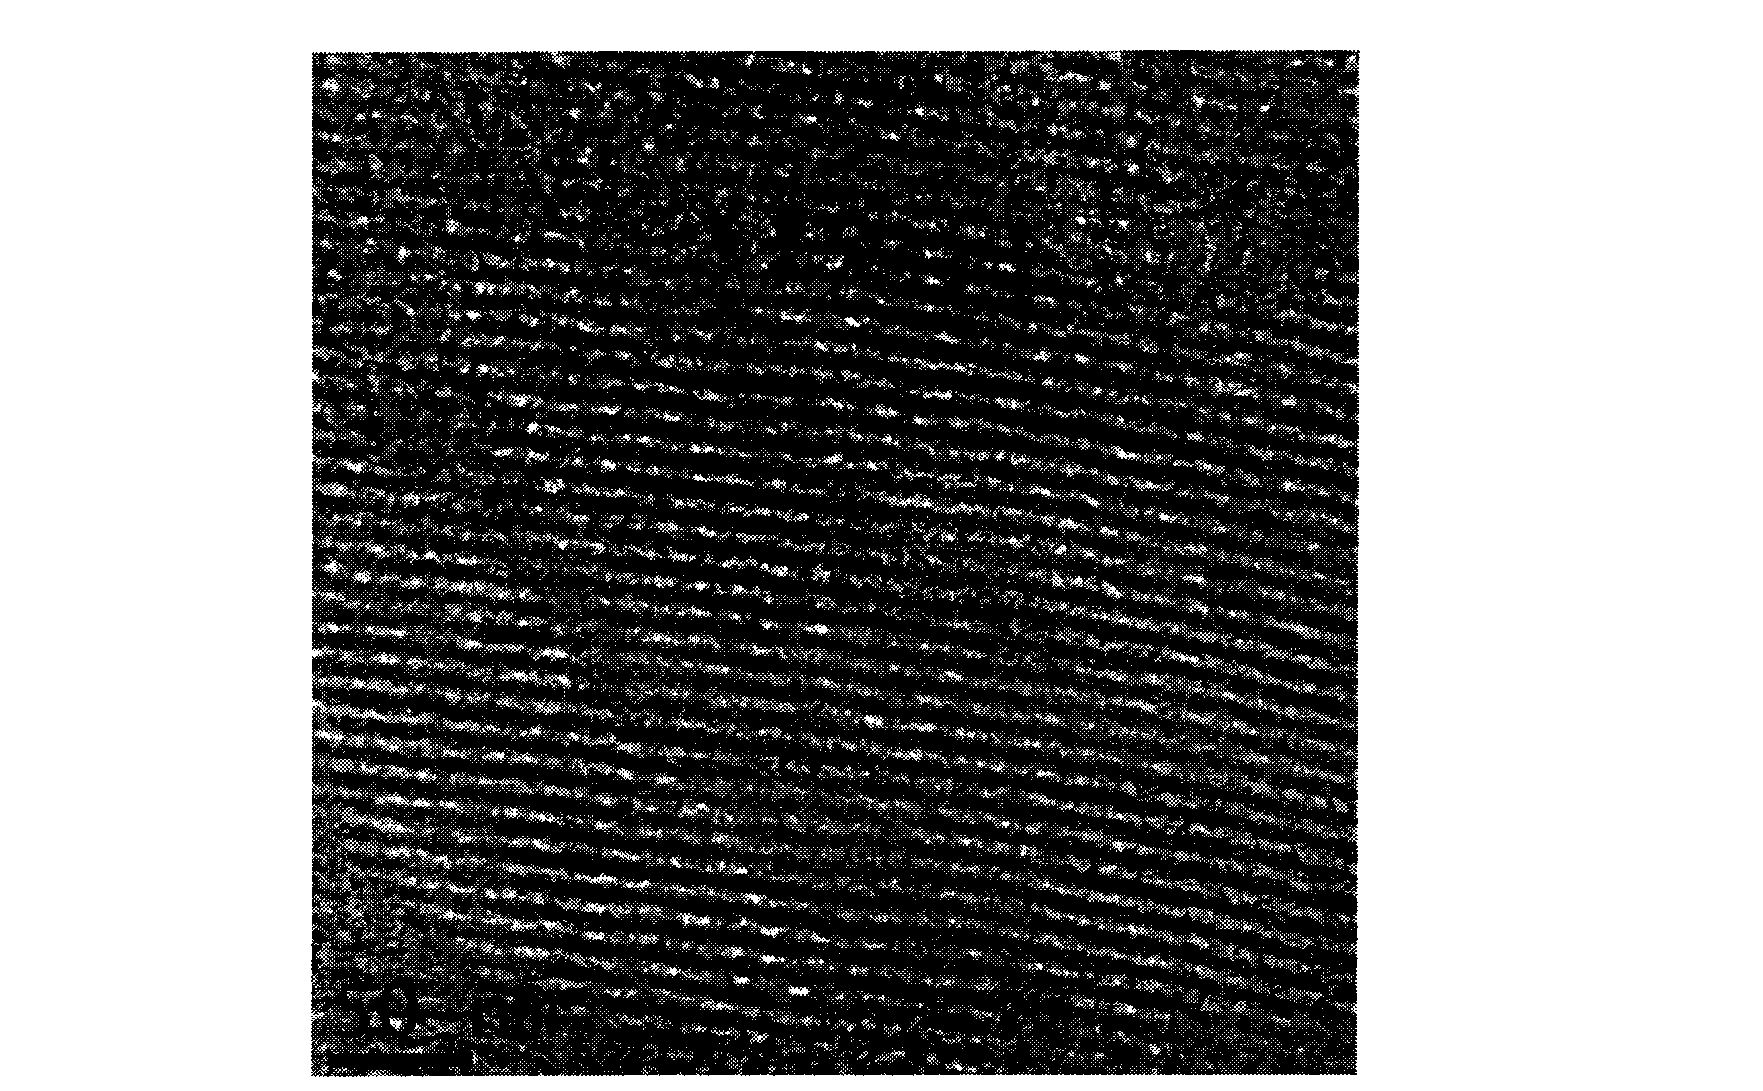 Mesoporous carbon/silicon composite anode material and preparation method thereof